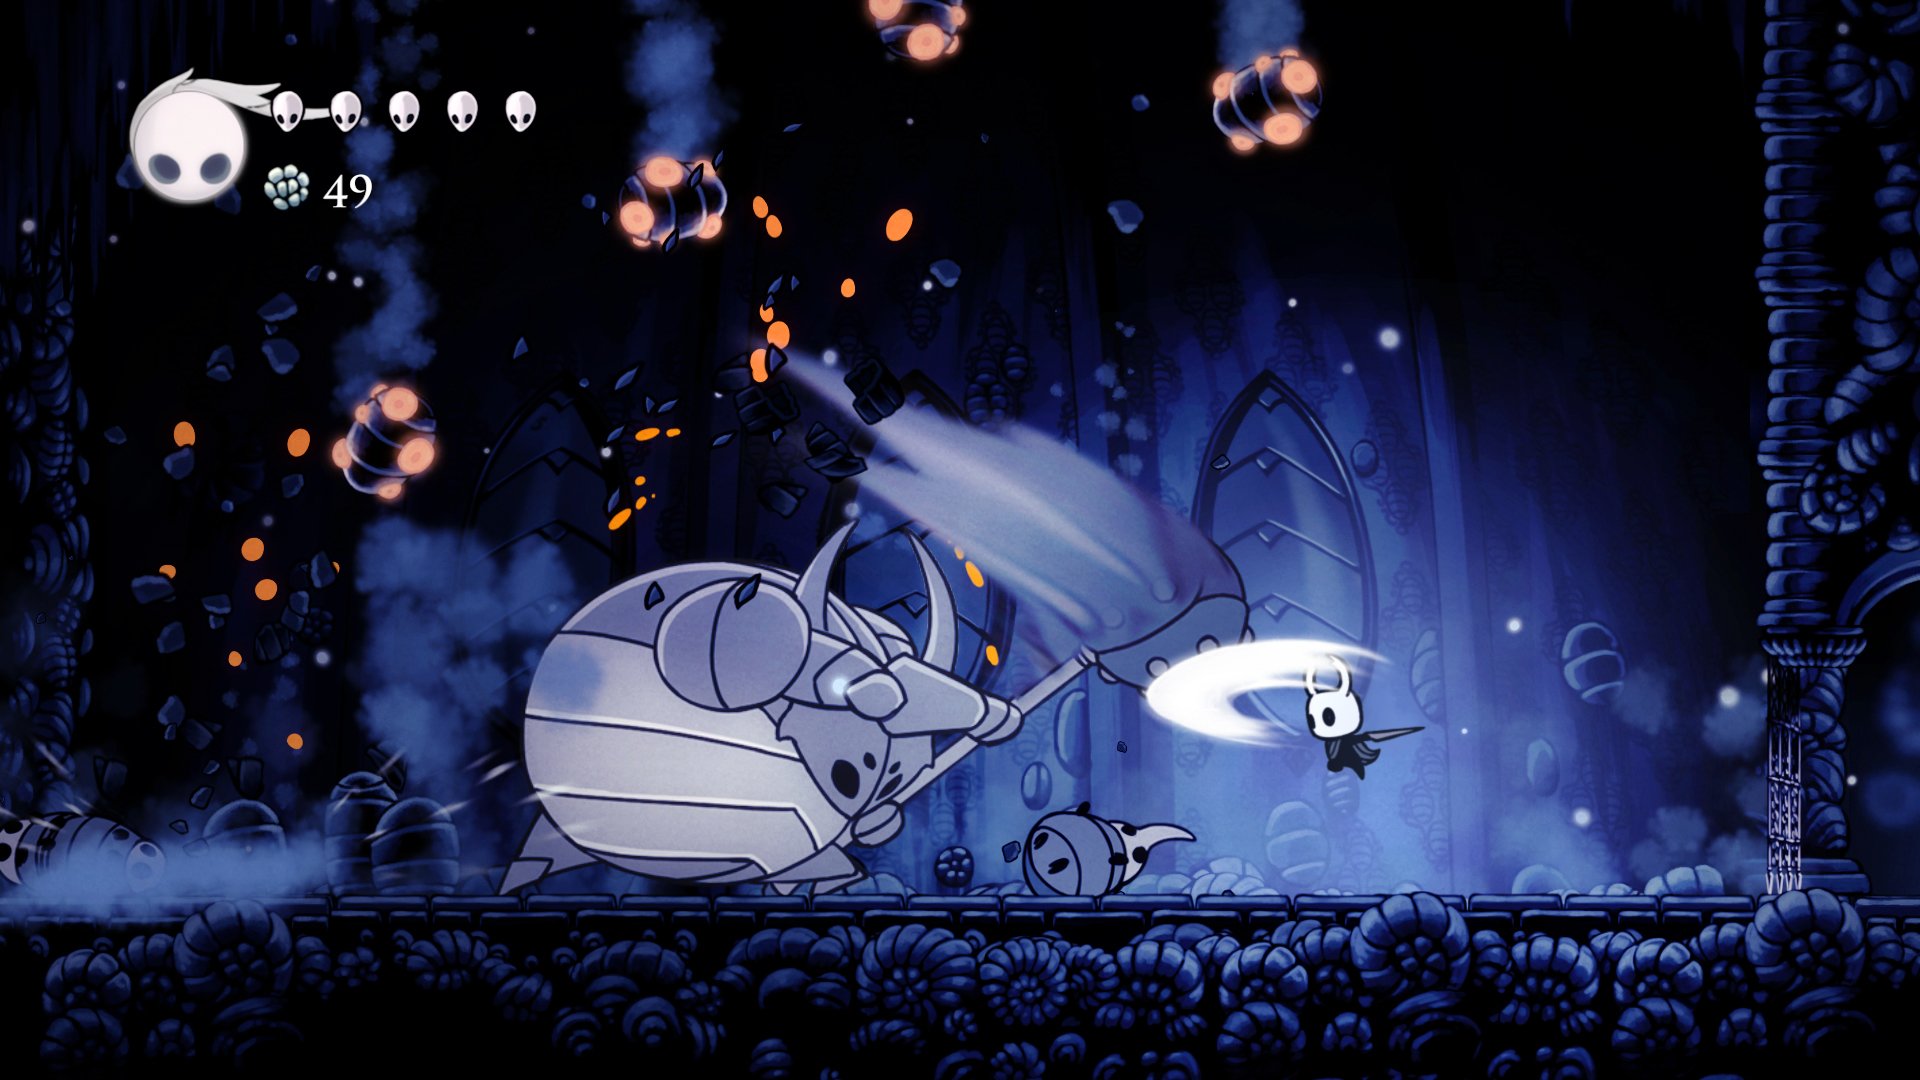 Hollow Knight An atmospheric adventure through a surreal bug